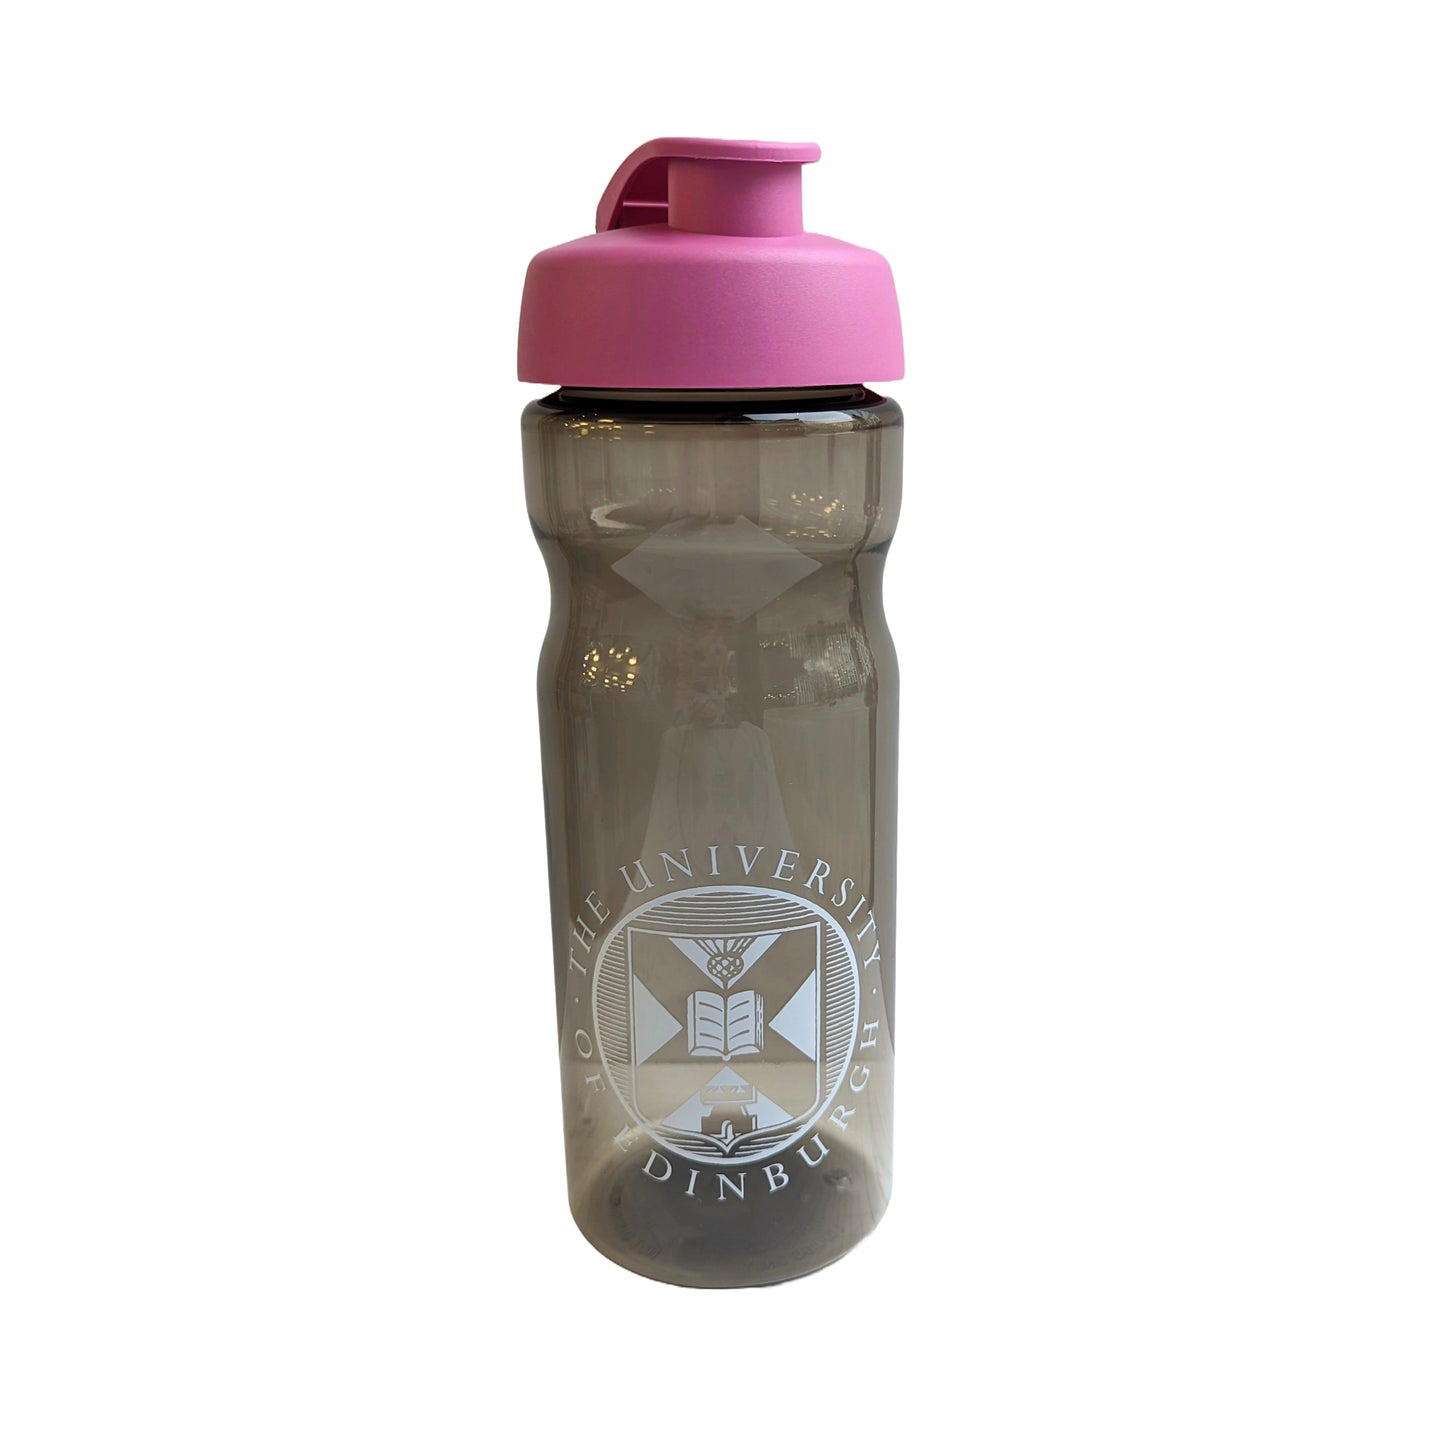 An opaque dark grey water bottle with a white university crest and a pink cap